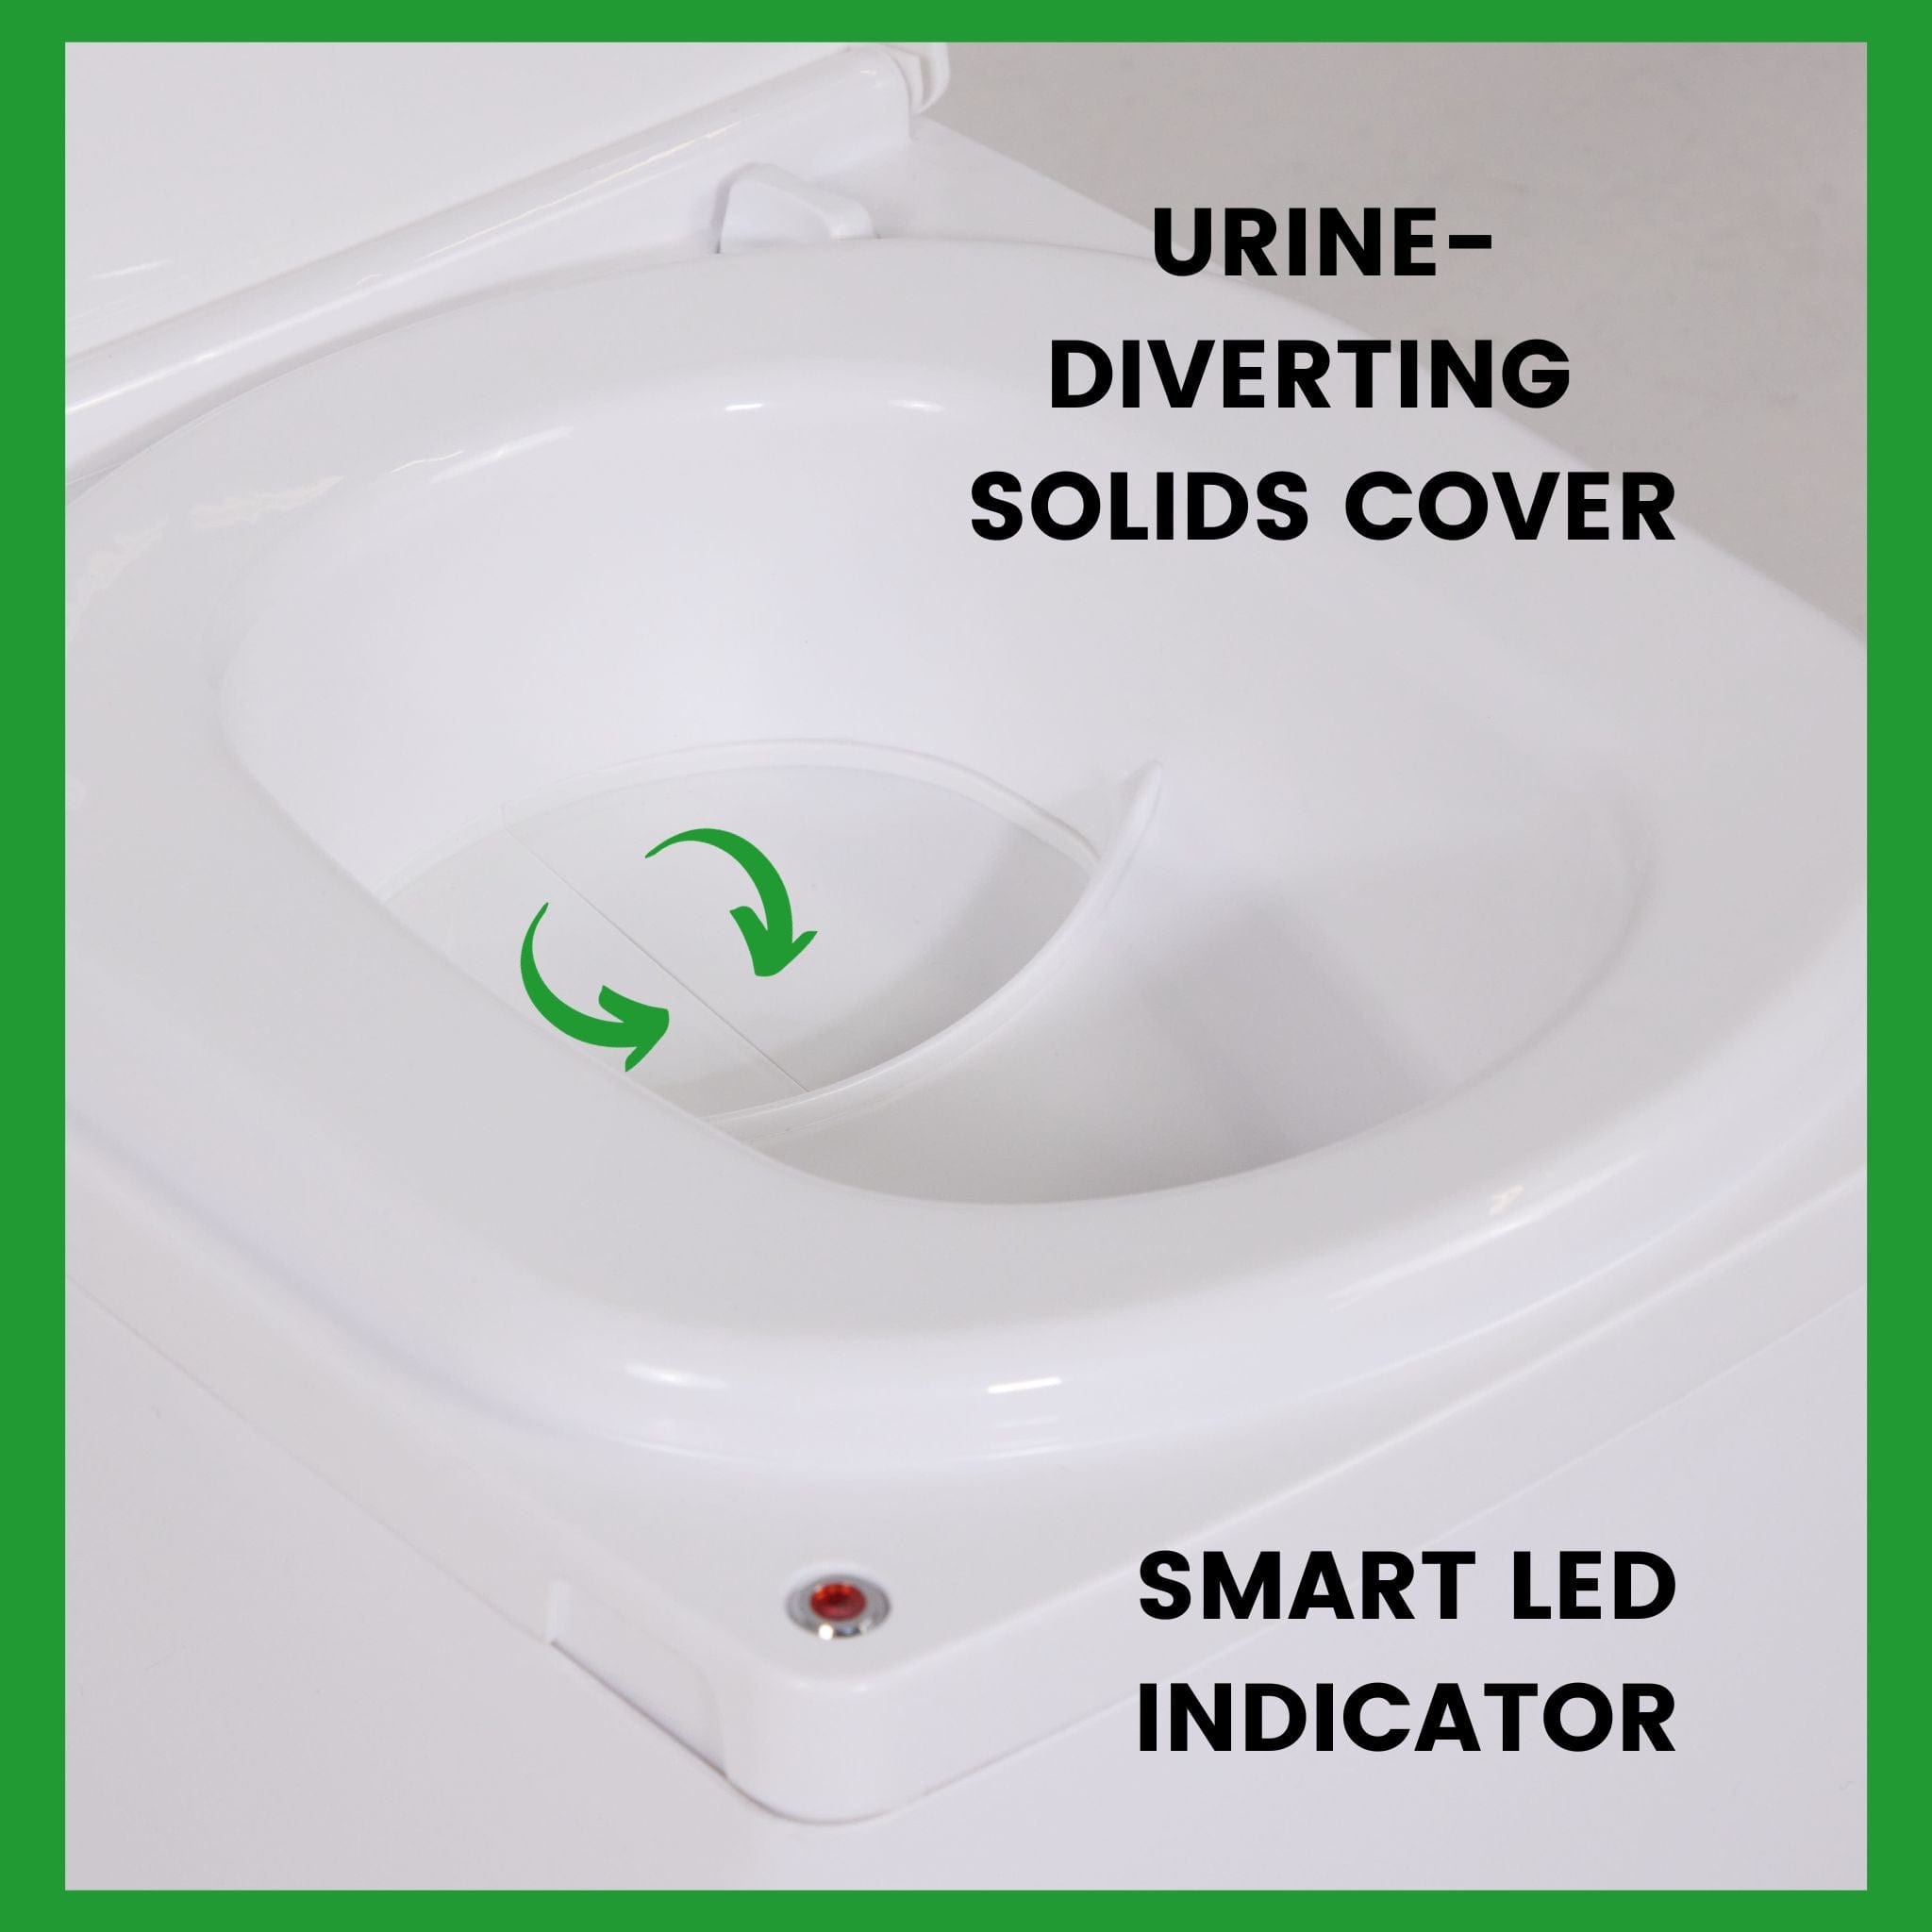 close up shot of the urine diverter and toilet seat of Cuddy composting toilet showing the Smart LED Indicator and urine separating solids cover